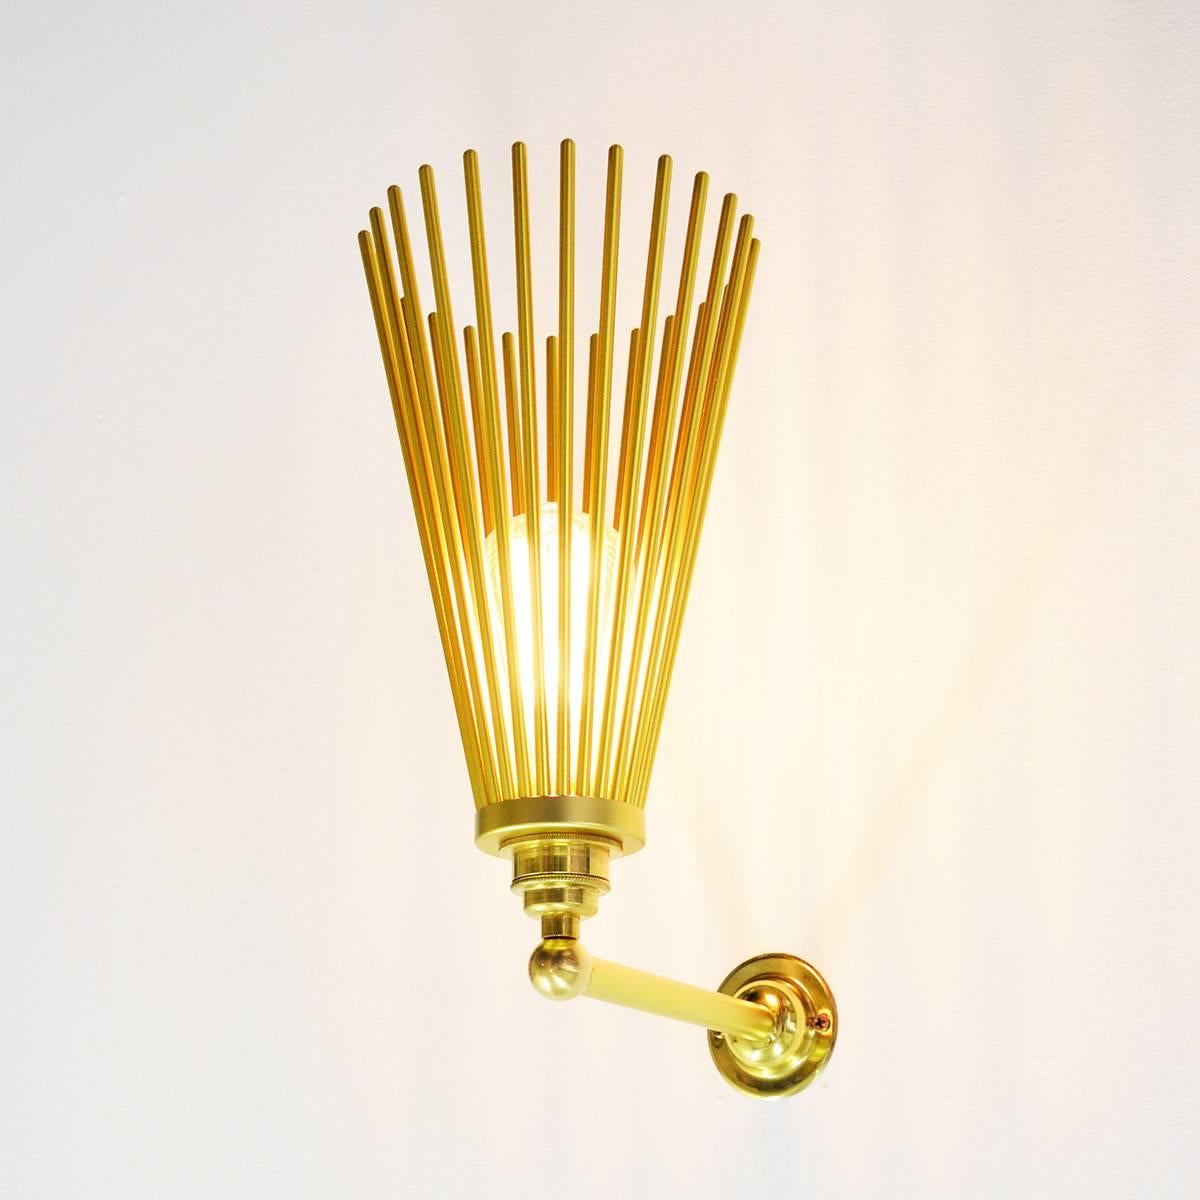 This elegant wall light combines 22 screw-in arms and a quirky squirrel-cage filament bulb to create a soft, warm glow of light. 

This wall light is available in anodised aluminium and is delivered packaged in a black tube.

Dimensions: H 320,